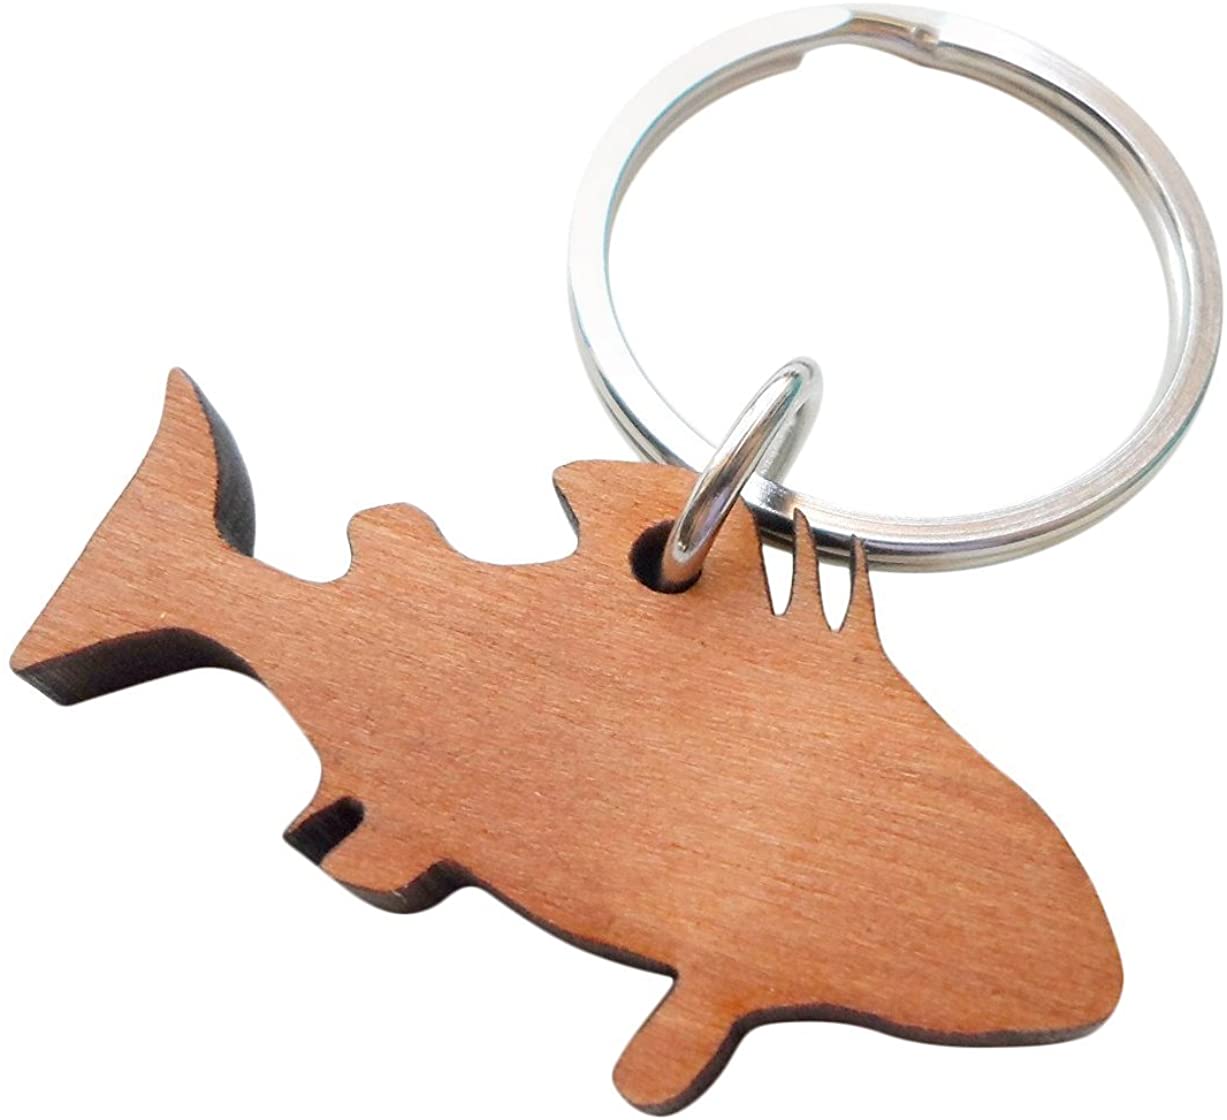 Fish Keychain: a Perfect Gift for Fishing Lovers, Handmade by